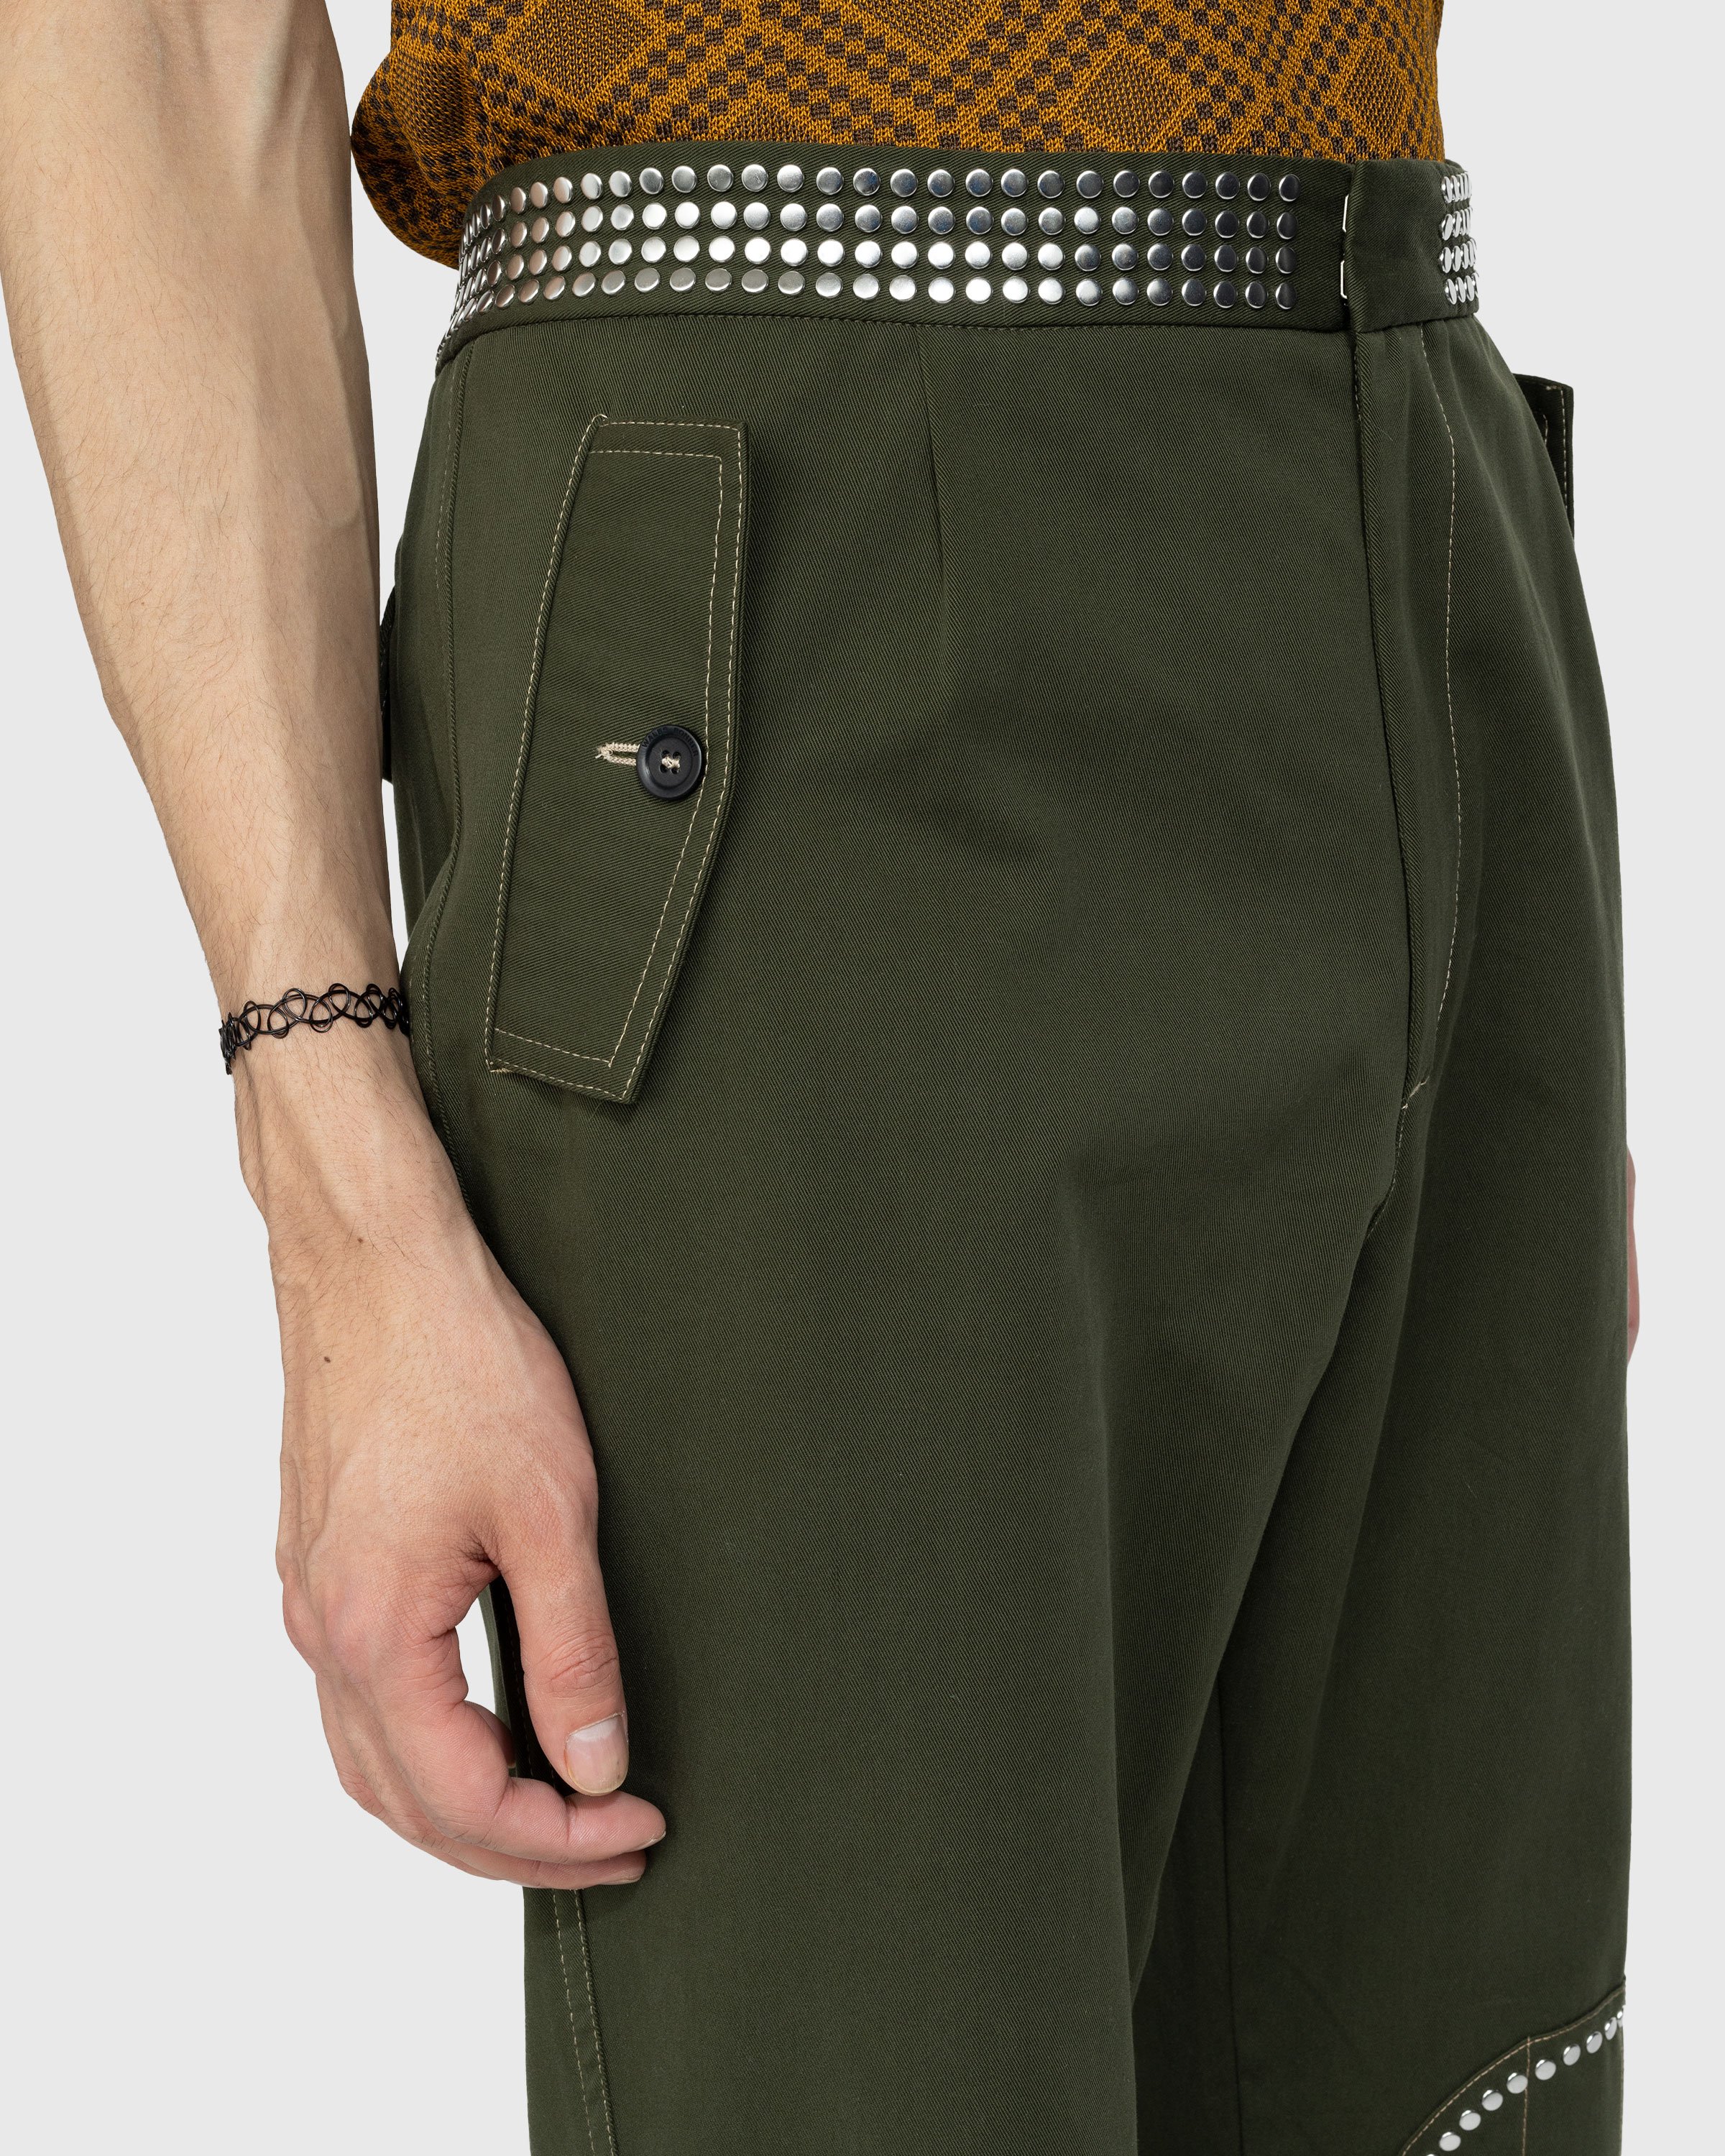 Wales Bonner - Tomorrow Trousers - Clothing - Green - Image 6